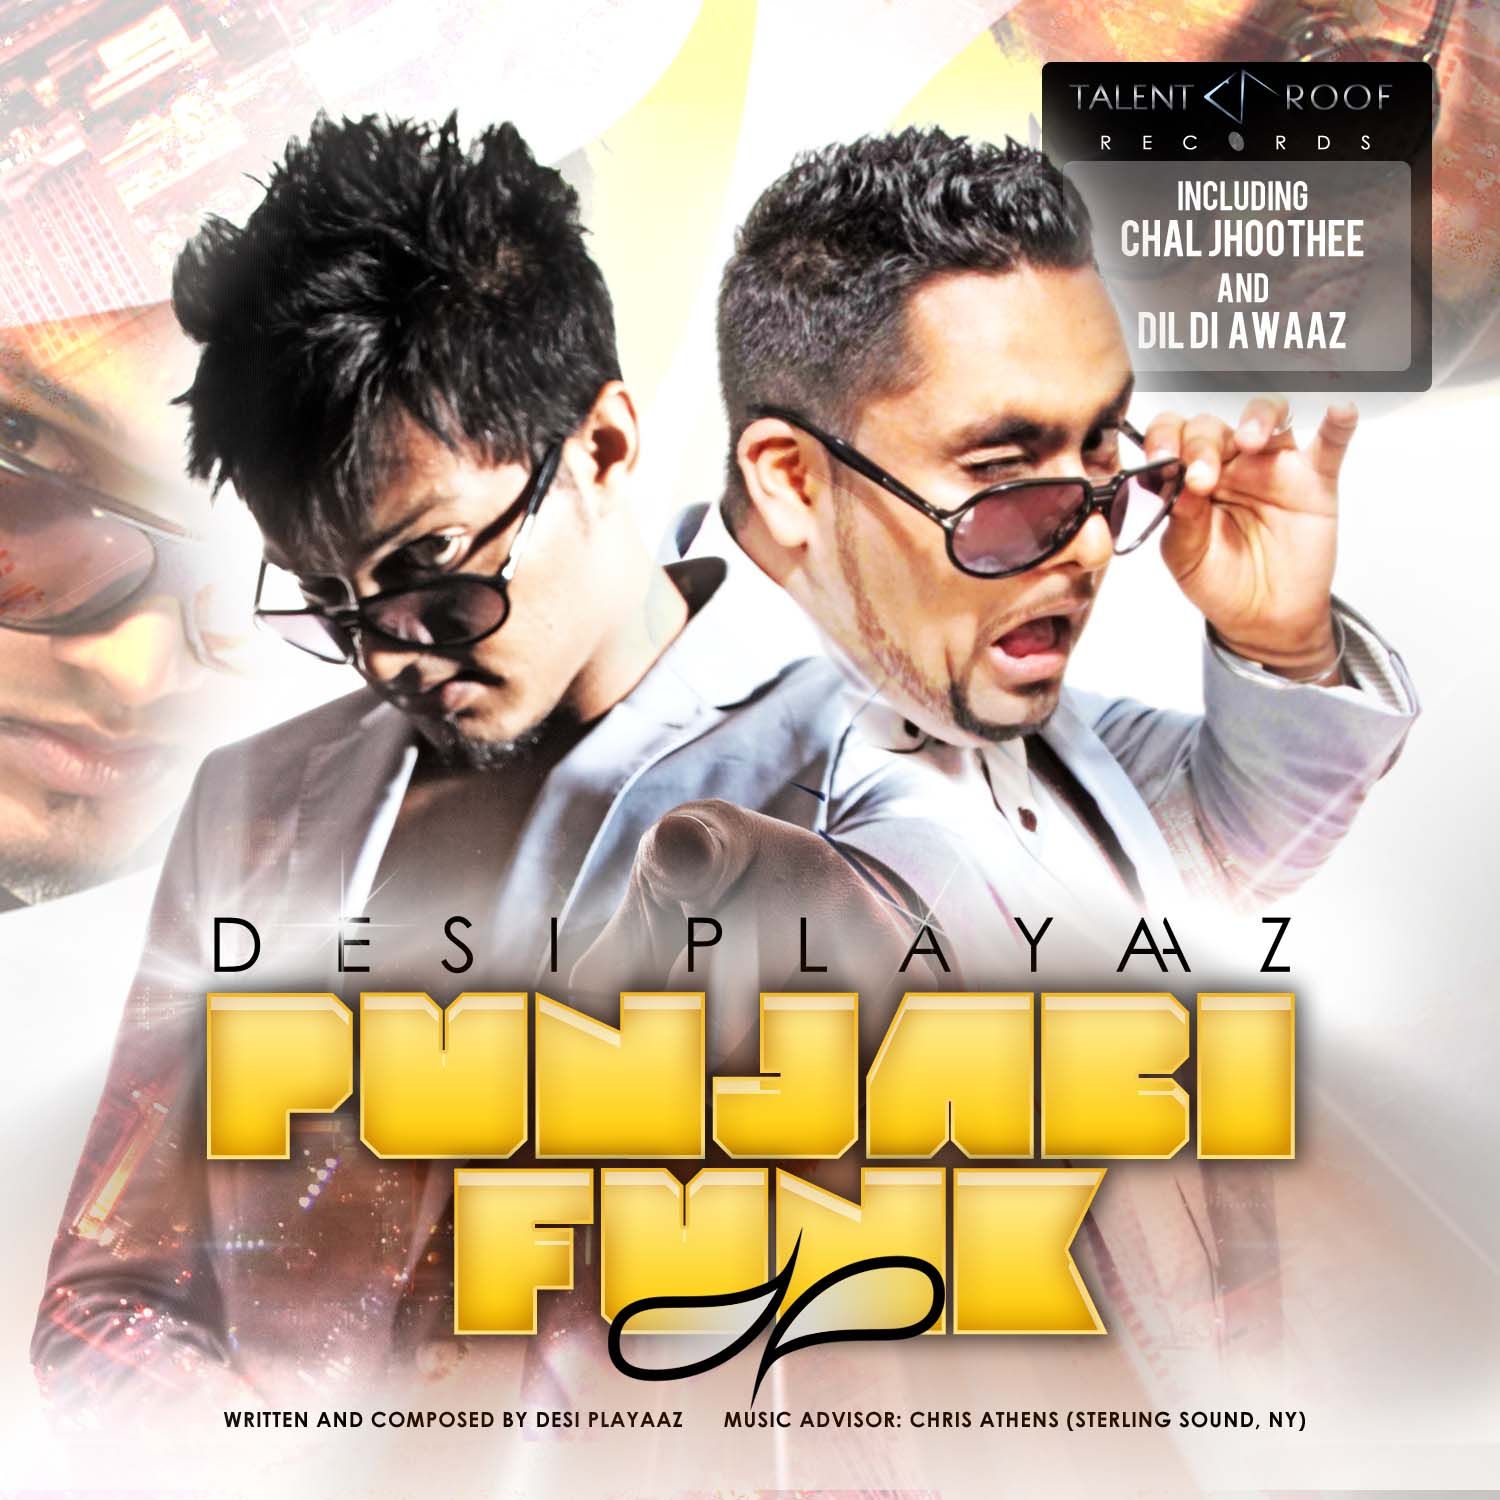 Are You Ready For Punjabi-Funk?